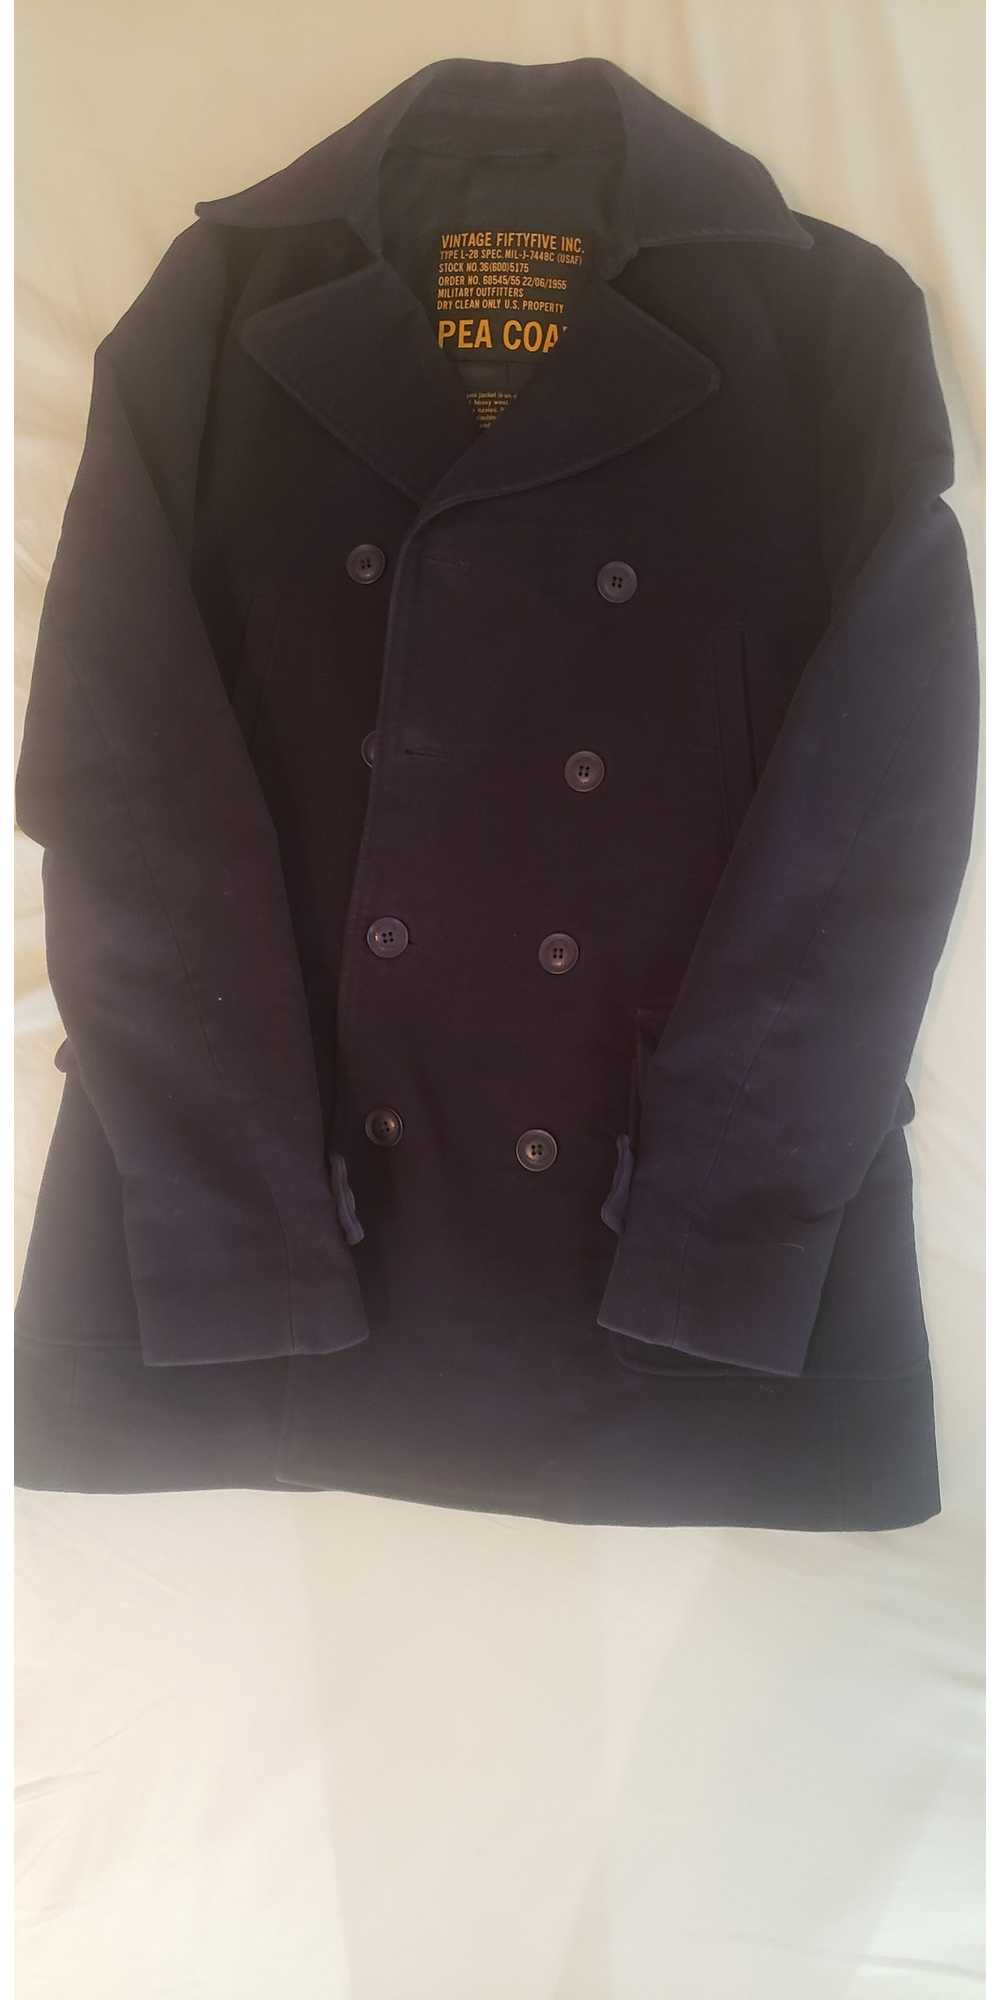 Vintage 55 Vintage Cotton Peacoat made in Italy - image 1